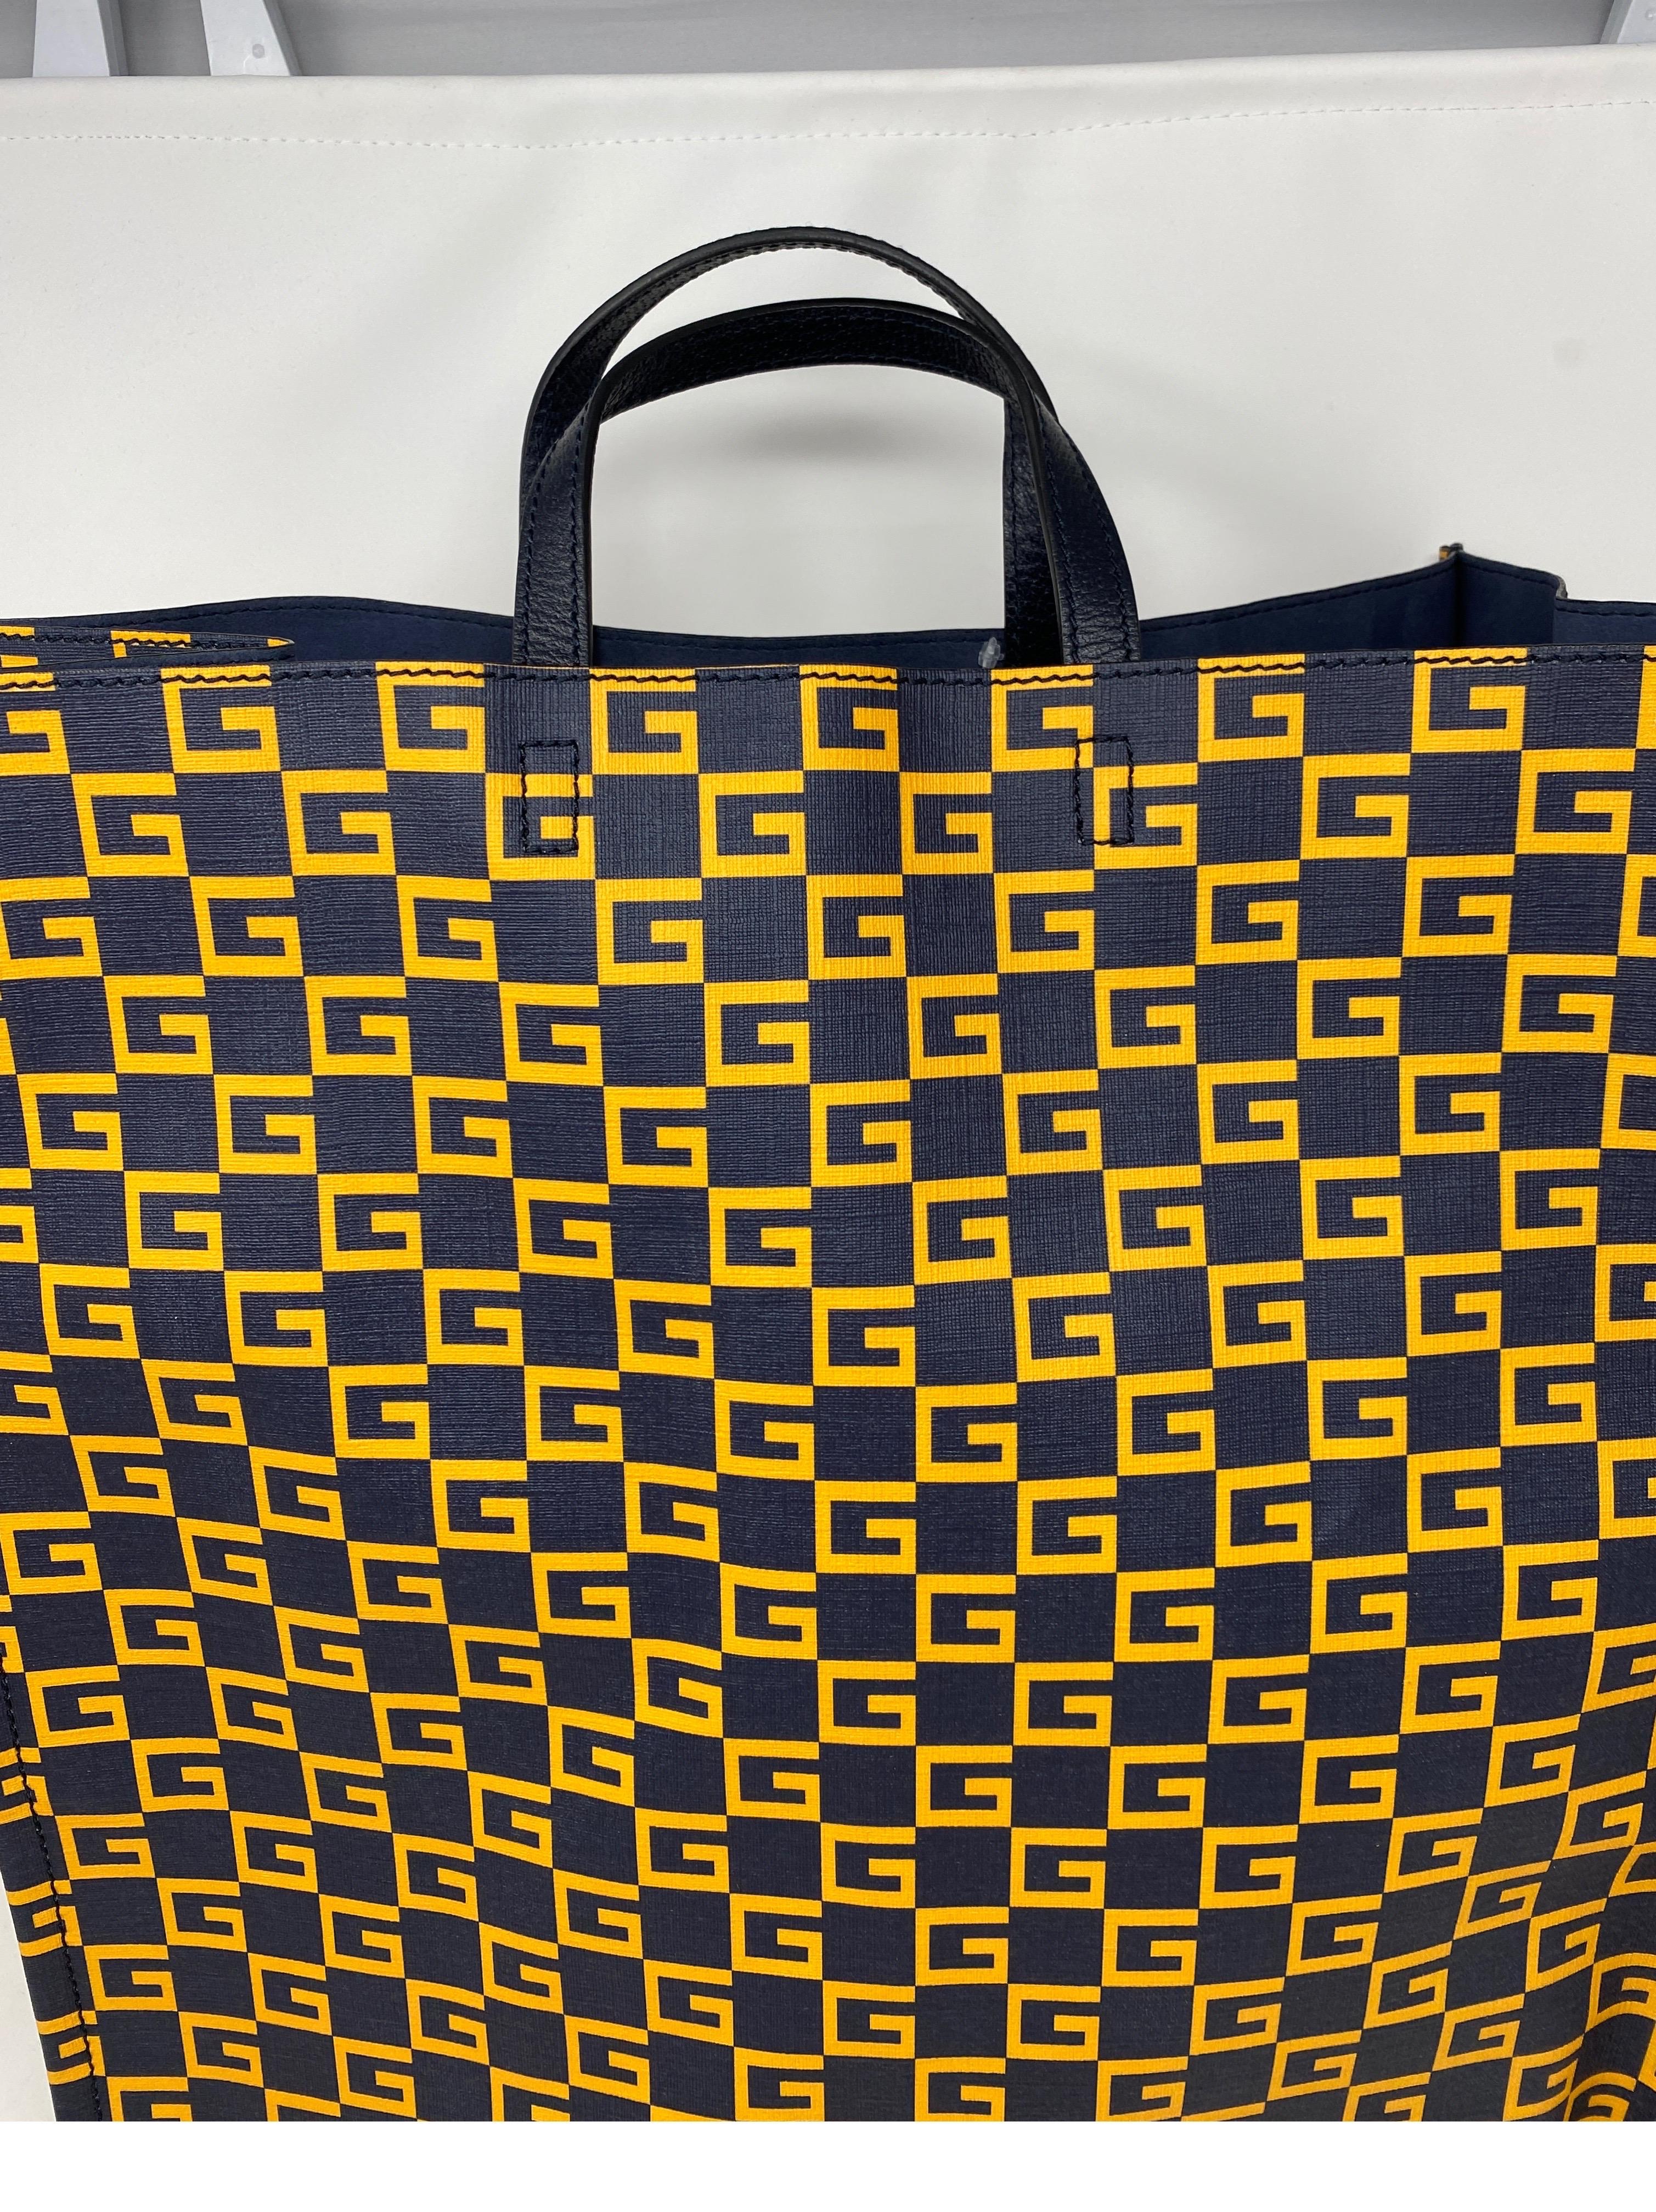 Gucci Large Navy and Gold Large Tote Bag. G all over yellow gold tote. Dark navy/ black color with navy interior. Excellent like new condition. Guaranteed authentic. 